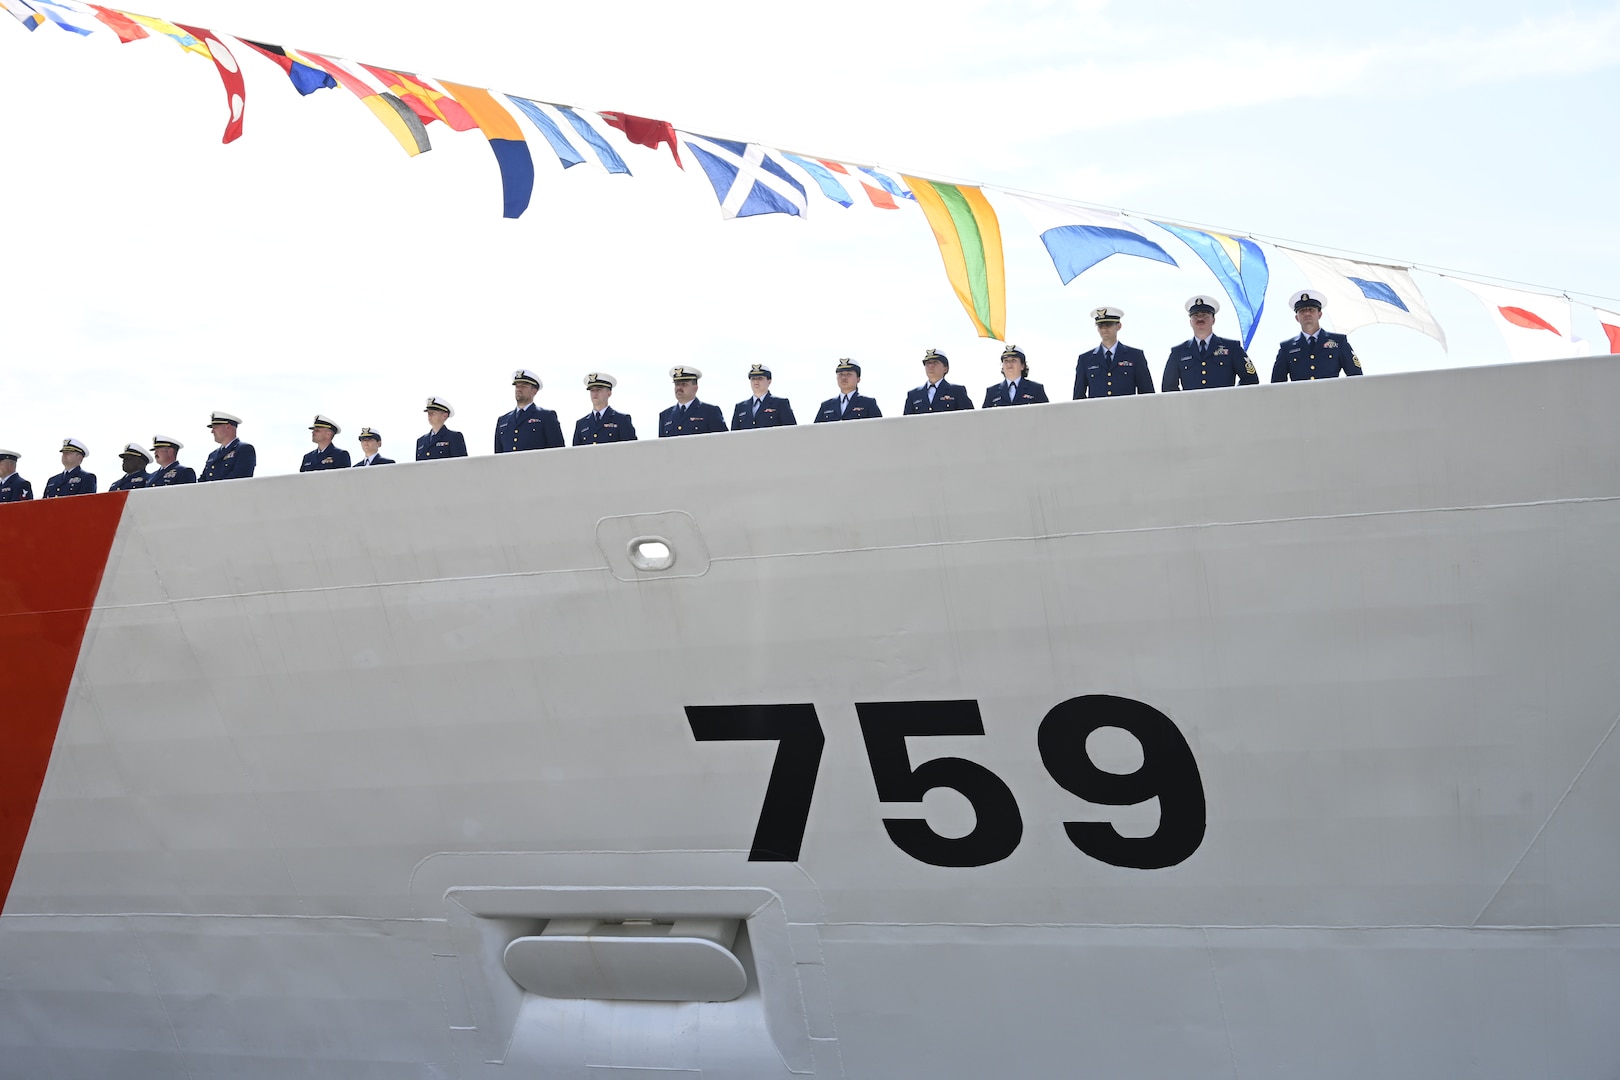 The crew of the Coast Guard Cutter Calhoun (WMSL 759) stands aboard the ship following its commissioning ceremony in North Charleston, South Carolina, April 20, 2024. The Calhoun, which is named for the first Master Chief Petty Officer of the Coast Guard, Charles Calhoun, was commissioned into service as the 10th National Security Cutter. (U.S. Coast Guard photo by Senior Chief Petty Officer Nick Ameen)